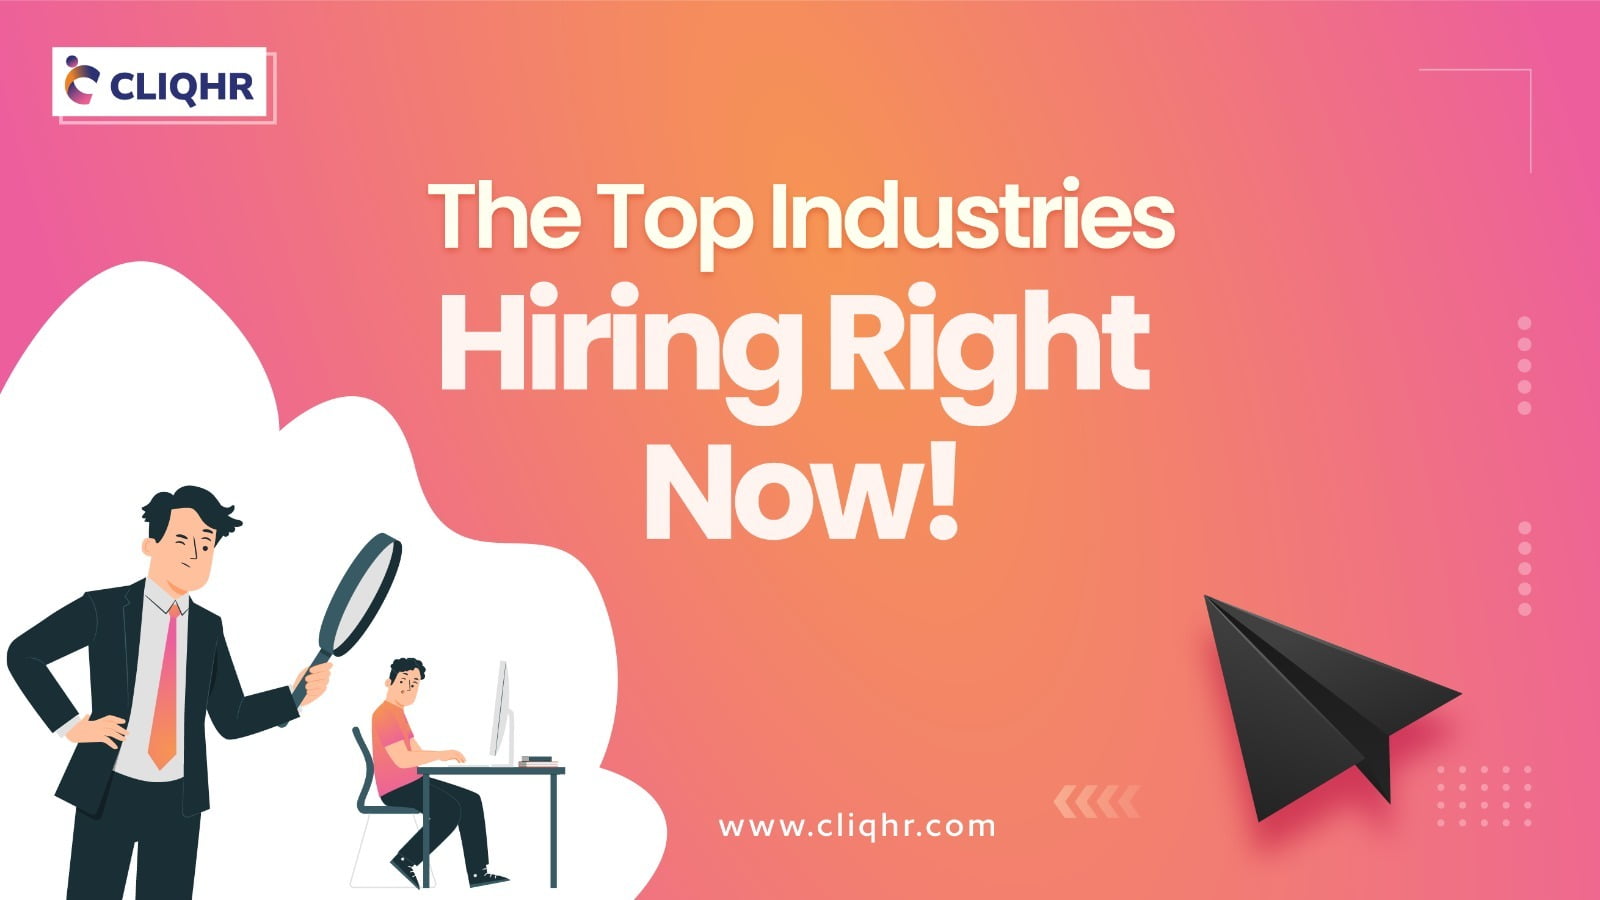 The top industries hiring right now in India